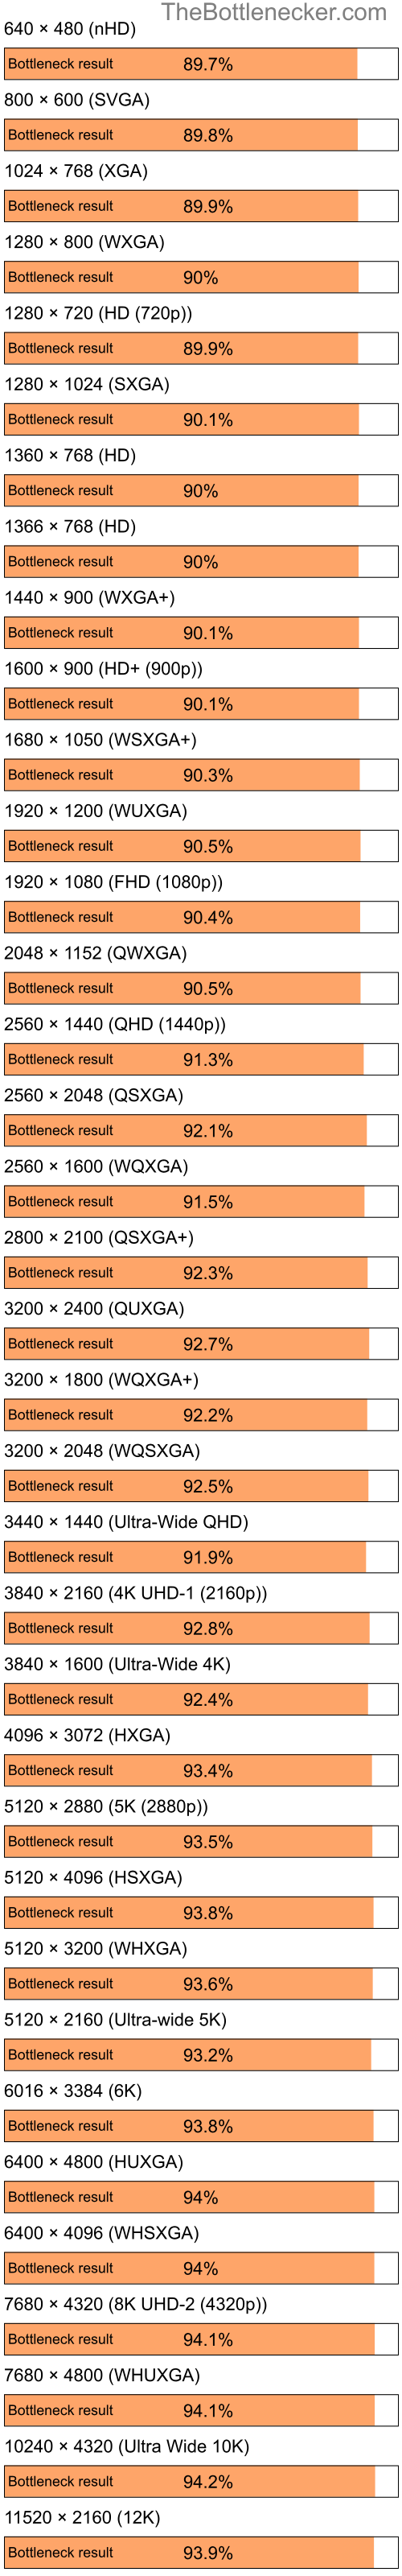 Bottleneck results by resolution for Intel Celeron and NVIDIA GeForce4 MX Integrated GPU in Graphic Card Intense Tasks